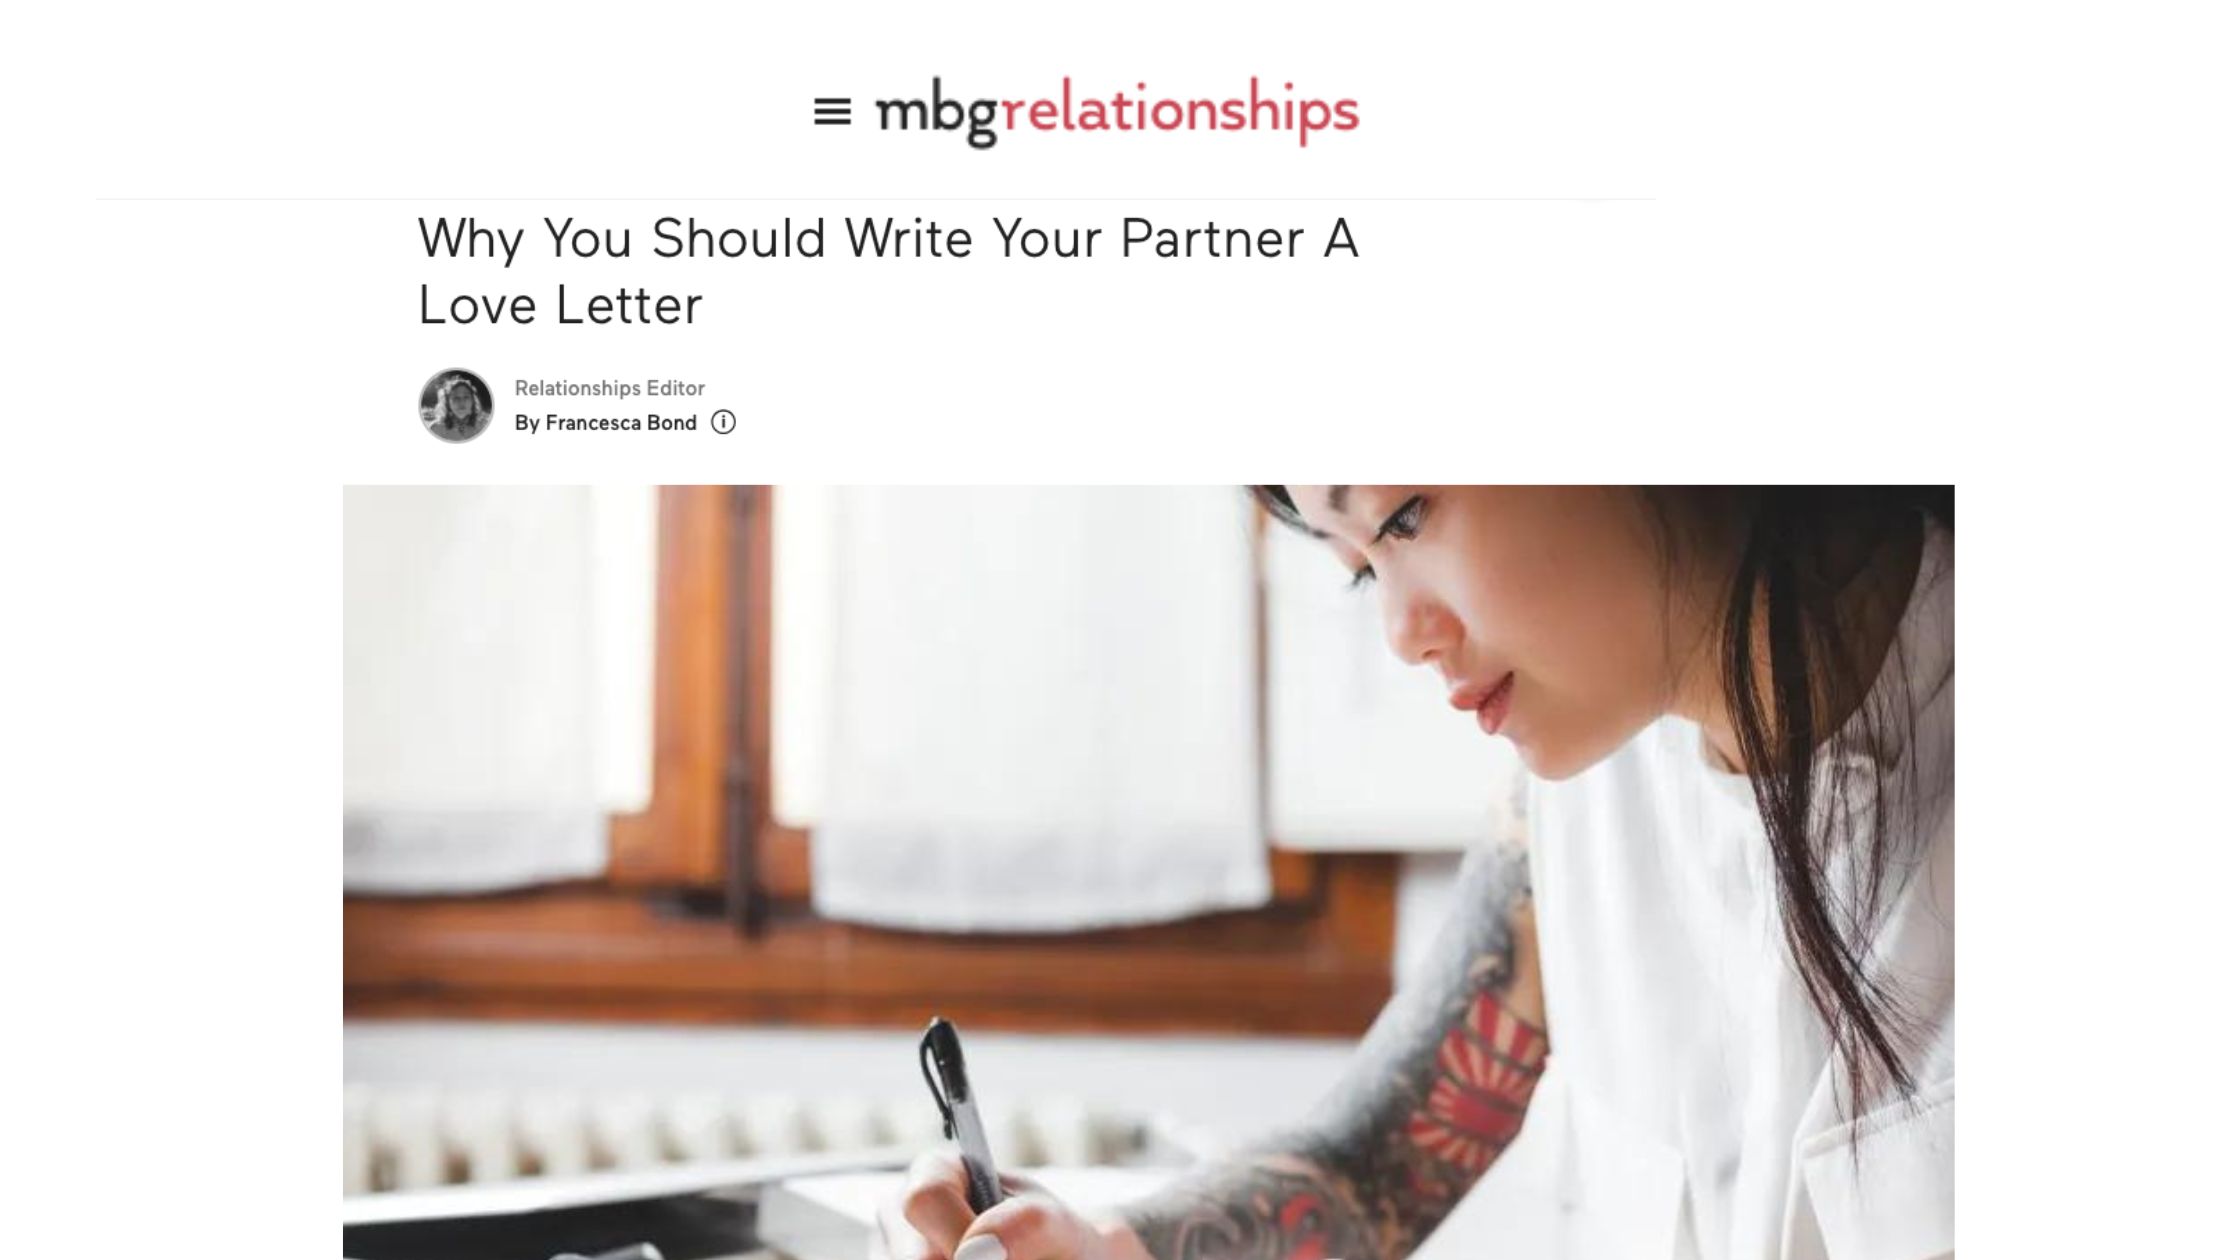 why you should write your partner a love ketter